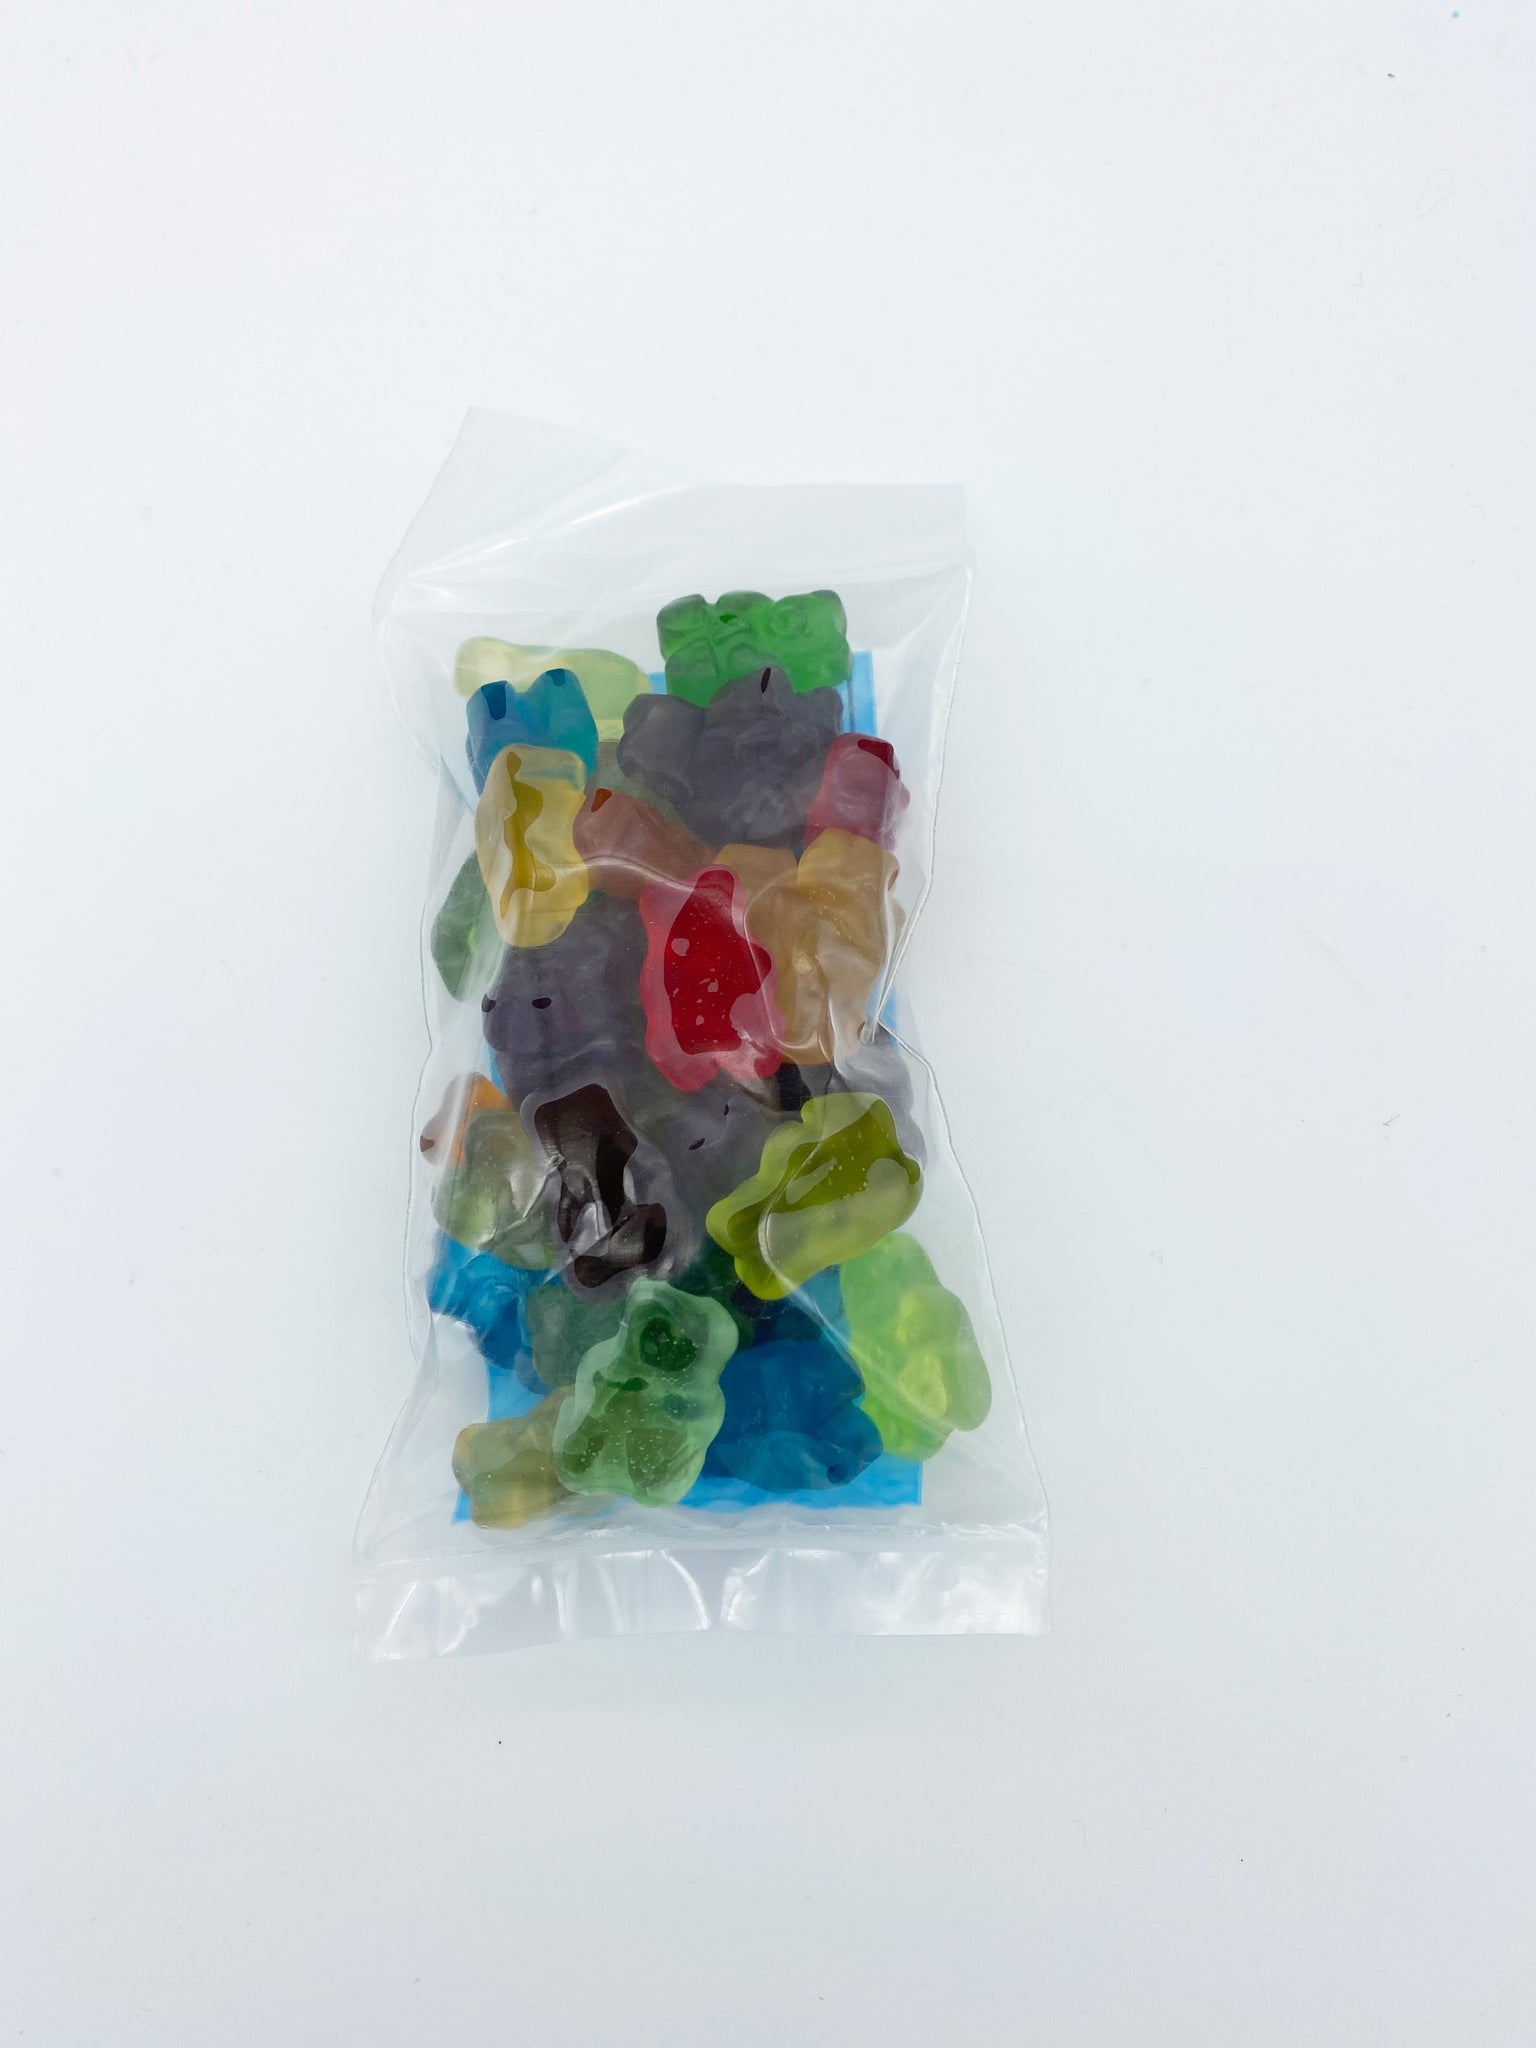 12 FLAVOR BEARS – The Penny Candy Store